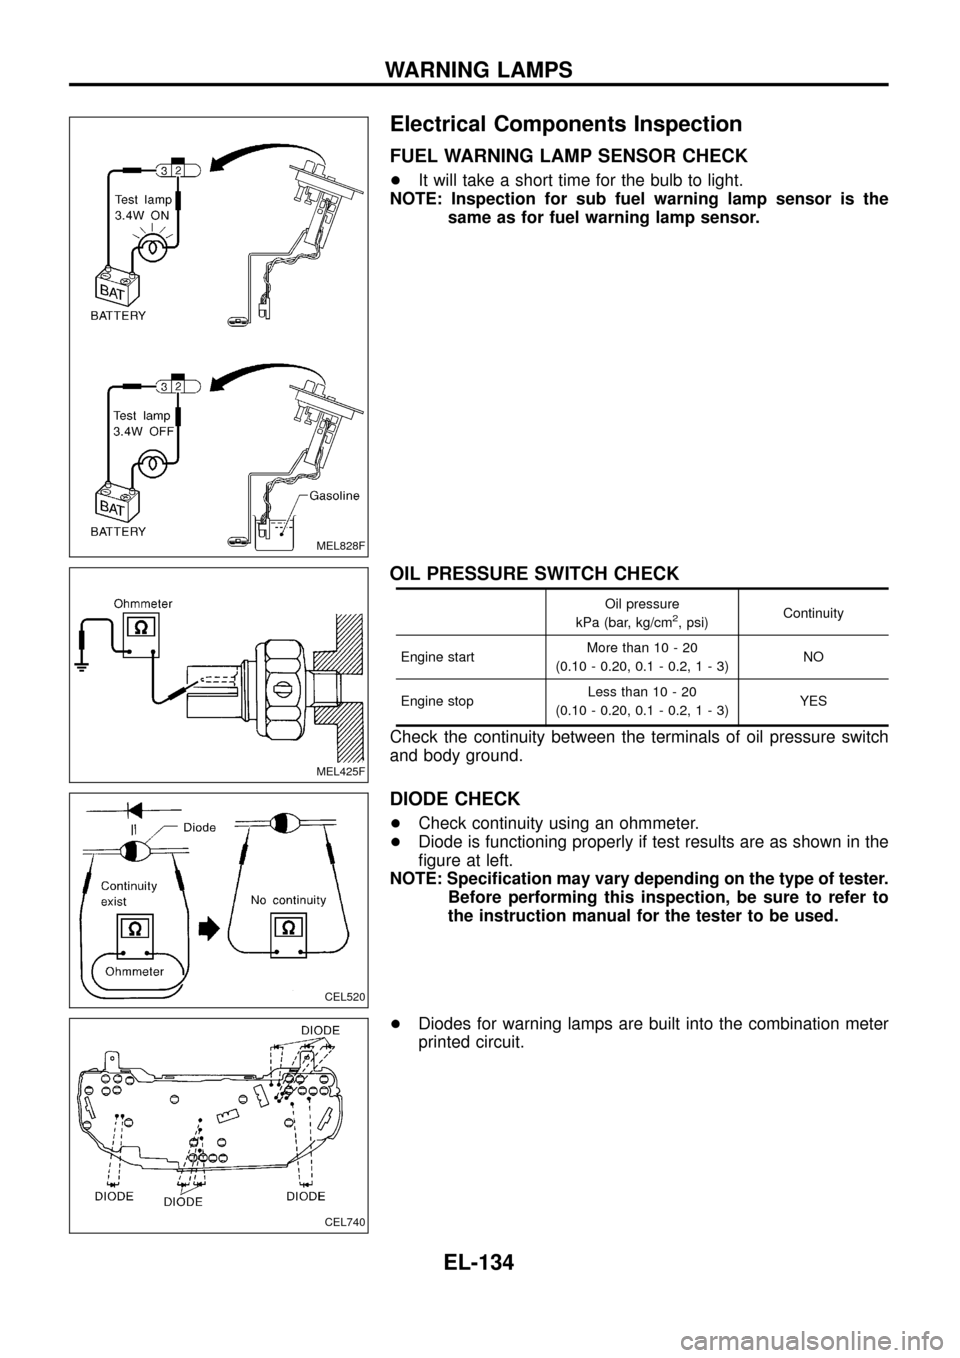 NISSAN PATROL 1998 Y61 / 5.G Electrical System Workshop Manual Electrical Components Inspection
FUEL WARNING LAMP SENSOR CHECK
+It will take a short time for the bulb to light.
NOTE: Inspection for sub fuel warning lamp sensor is the
same as for fuel warning lamp